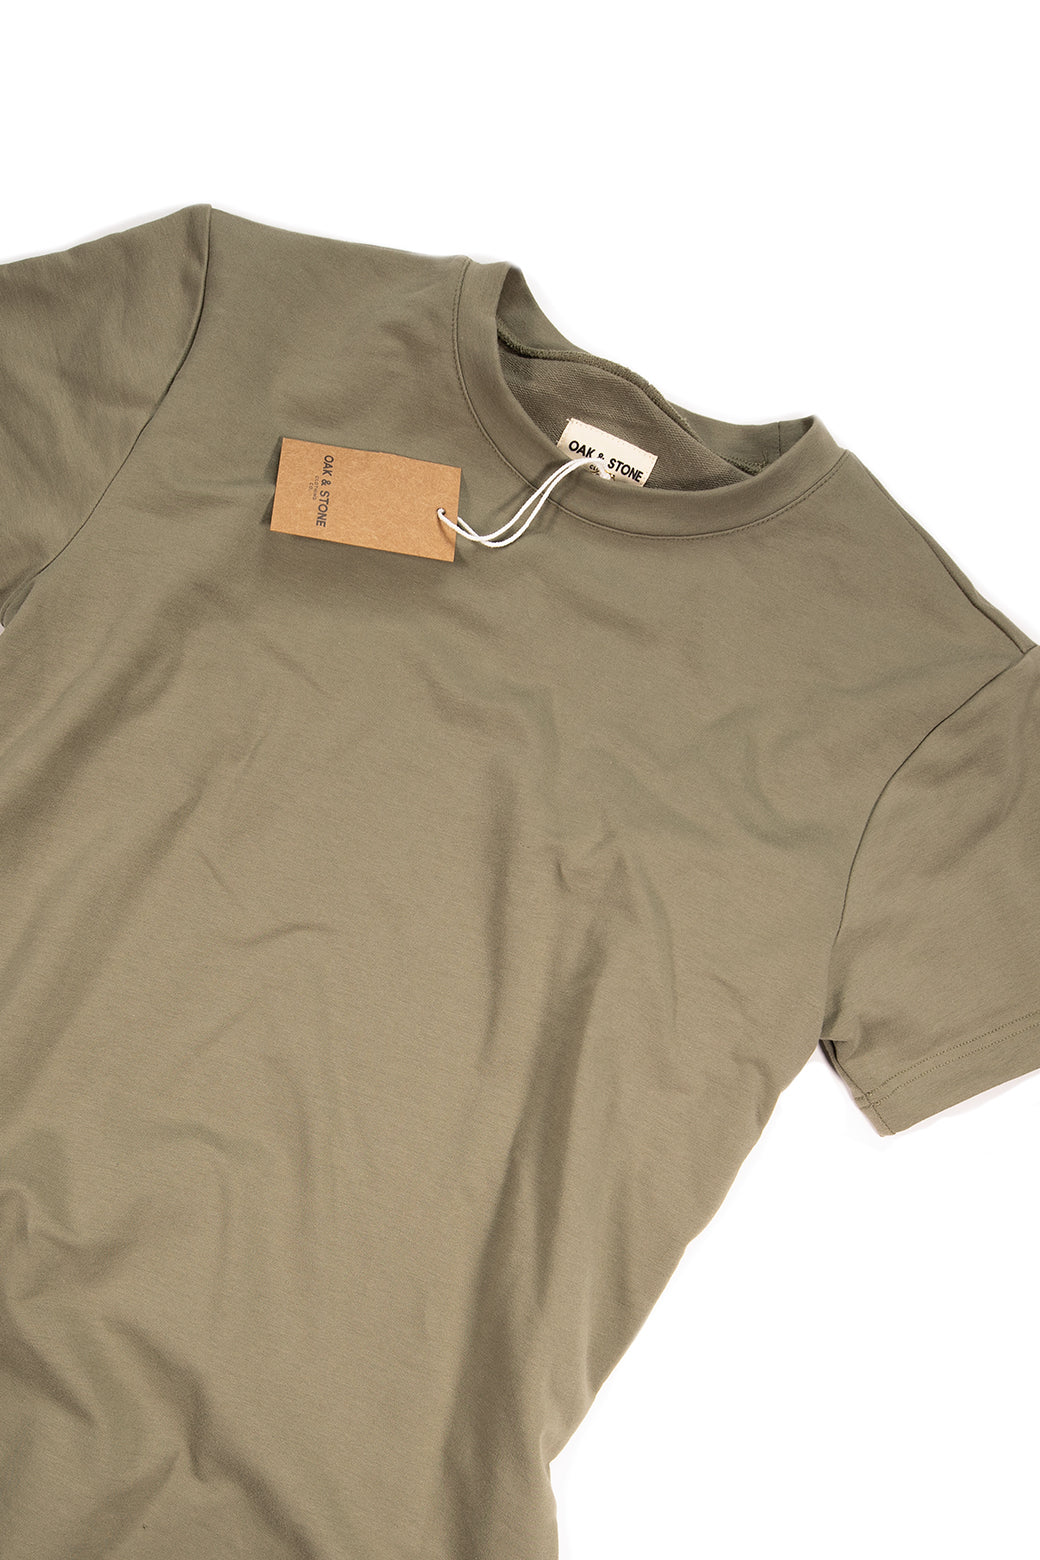 The Classic S/S Tee - Olive – Oak & Stone Clothing Co.